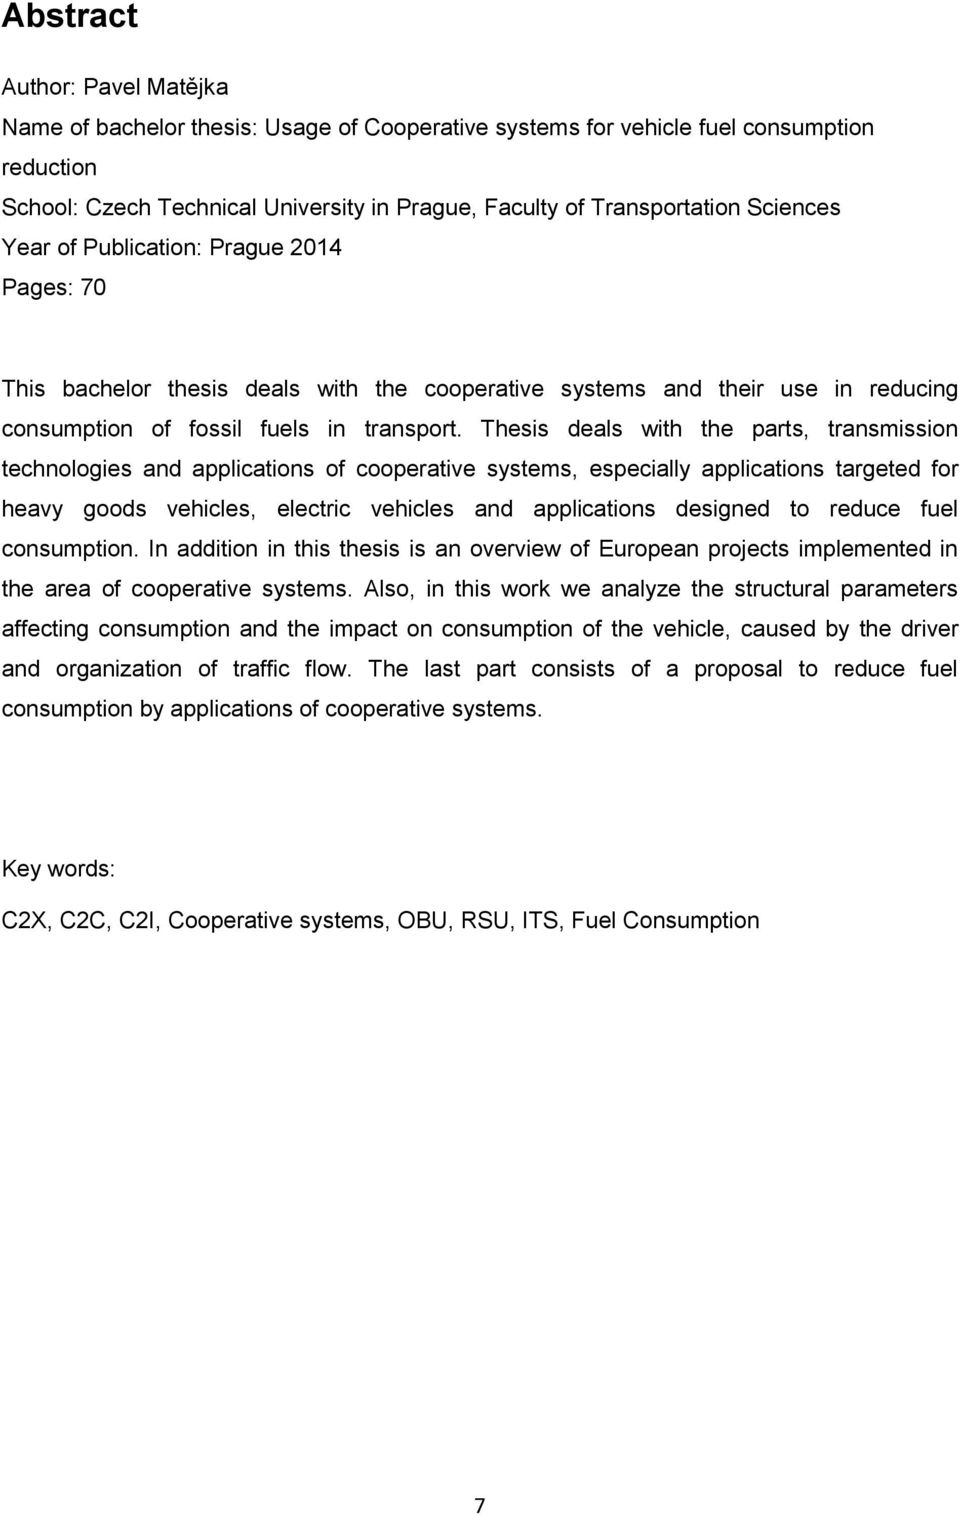 Thesis deals with the parts, transmission technologies and applications of cooperative systems, especially applications targeted for heavy goods vehicles, electric vehicles and applications designed